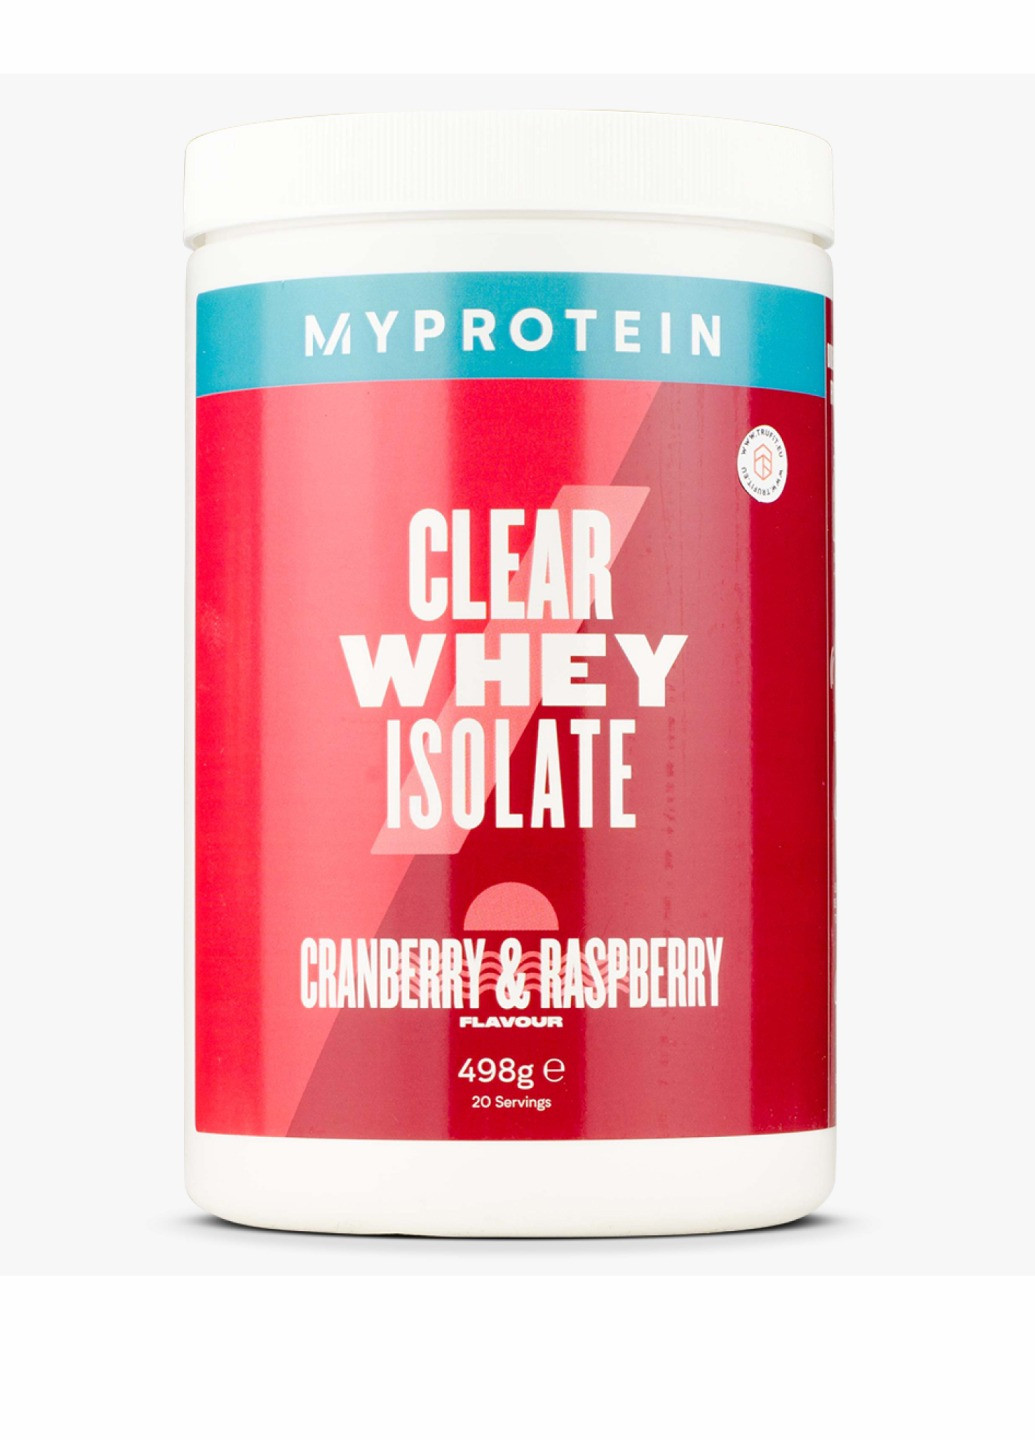 Протеин изолят Clear Whey Isolate - 498g Cranberry Raspberry My Protein (260516987)